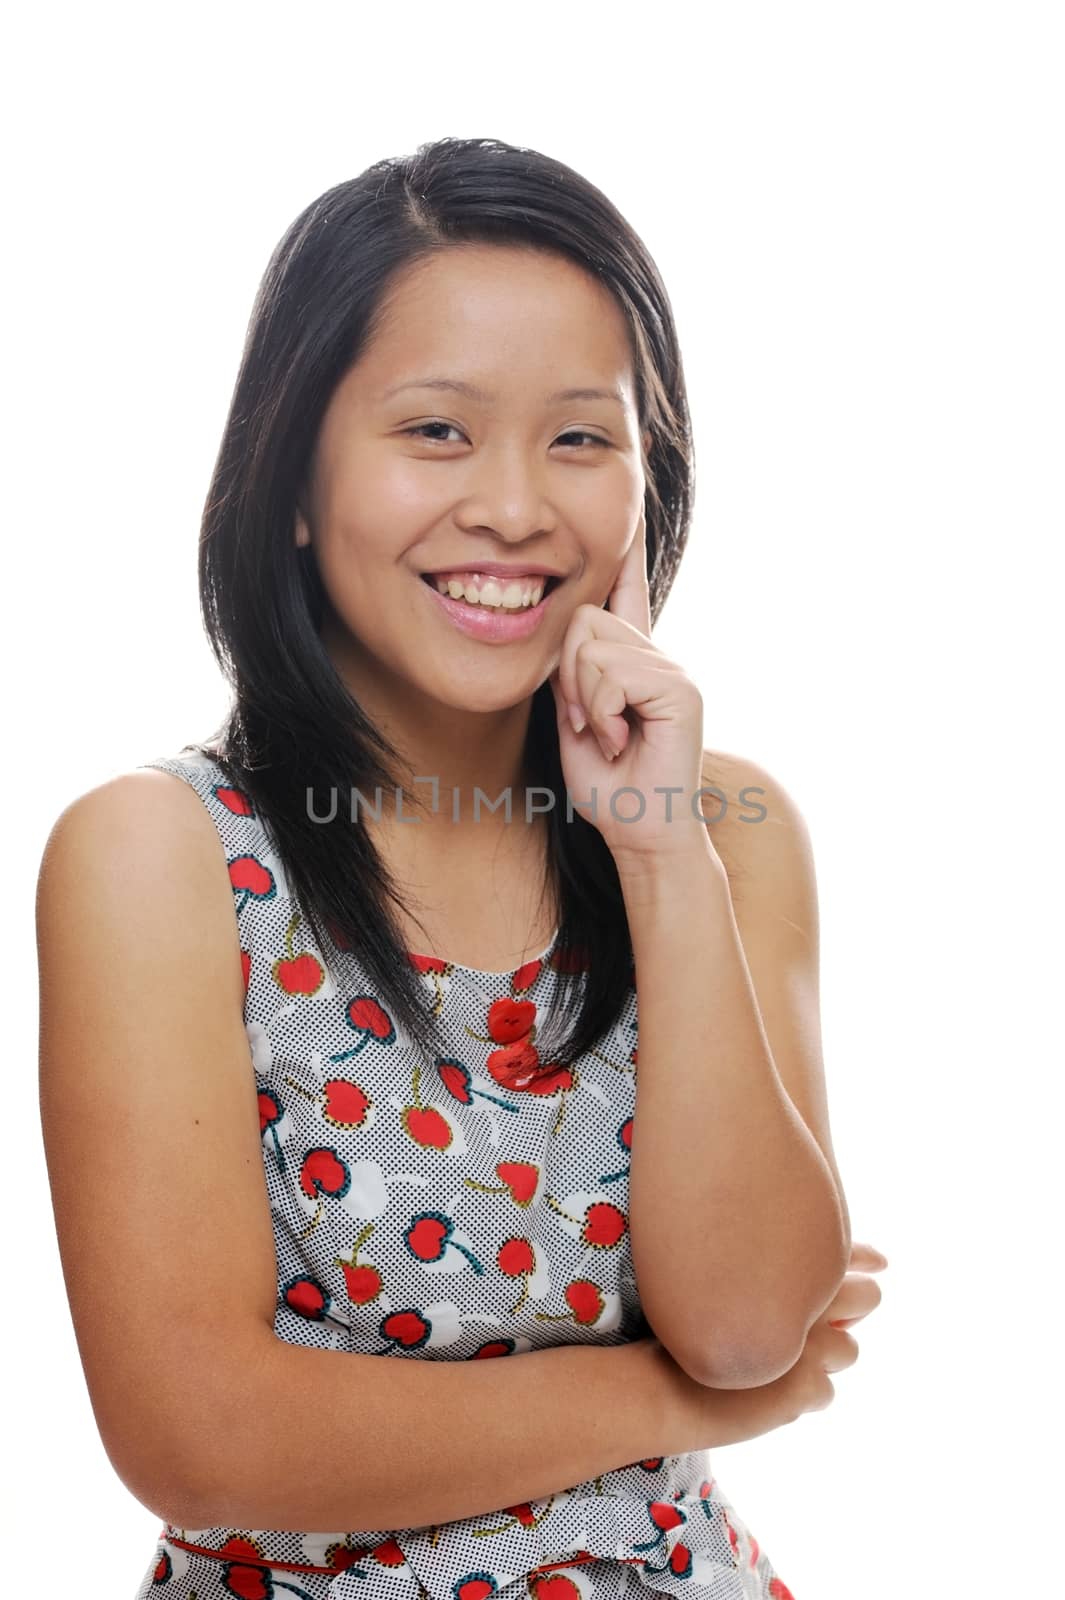 Asian girl laughing and looking cheerful